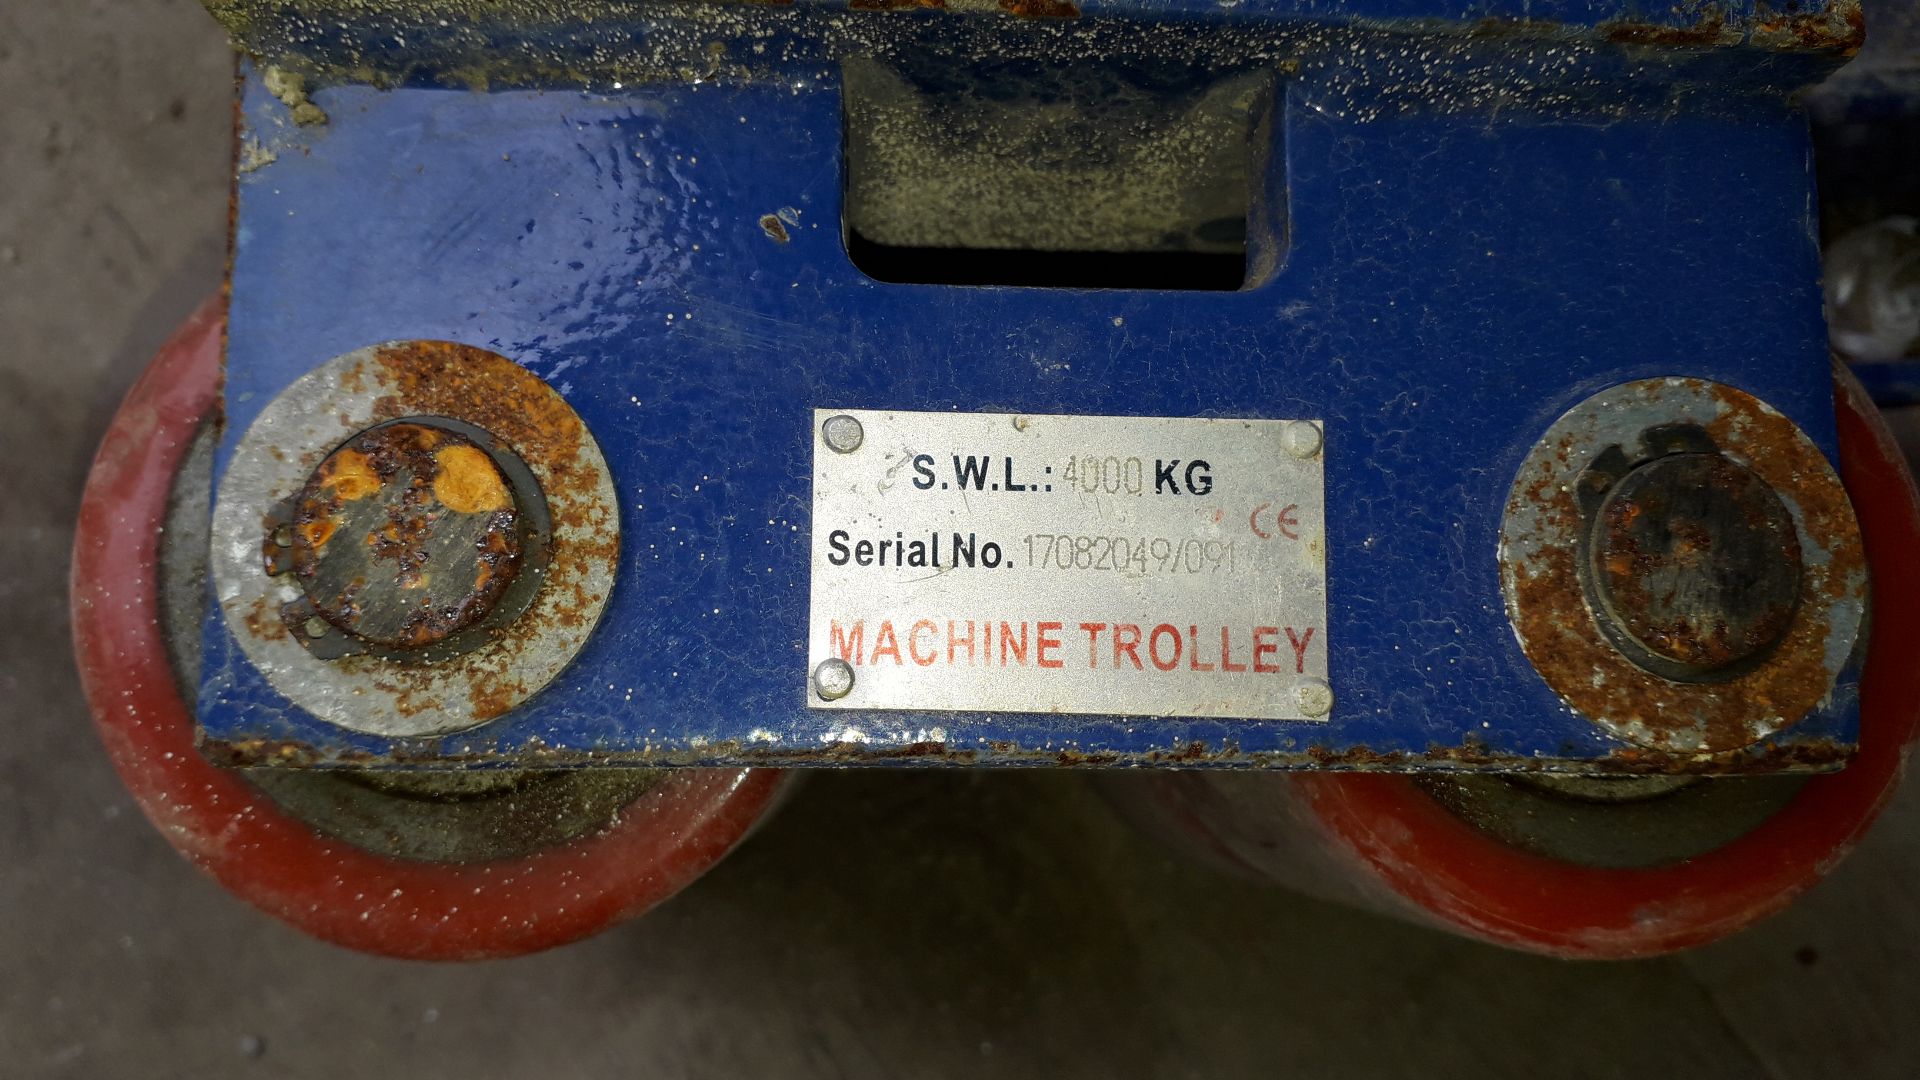 8T Machine Moving Dolly Skate Serial Number 170820 - Image 2 of 3